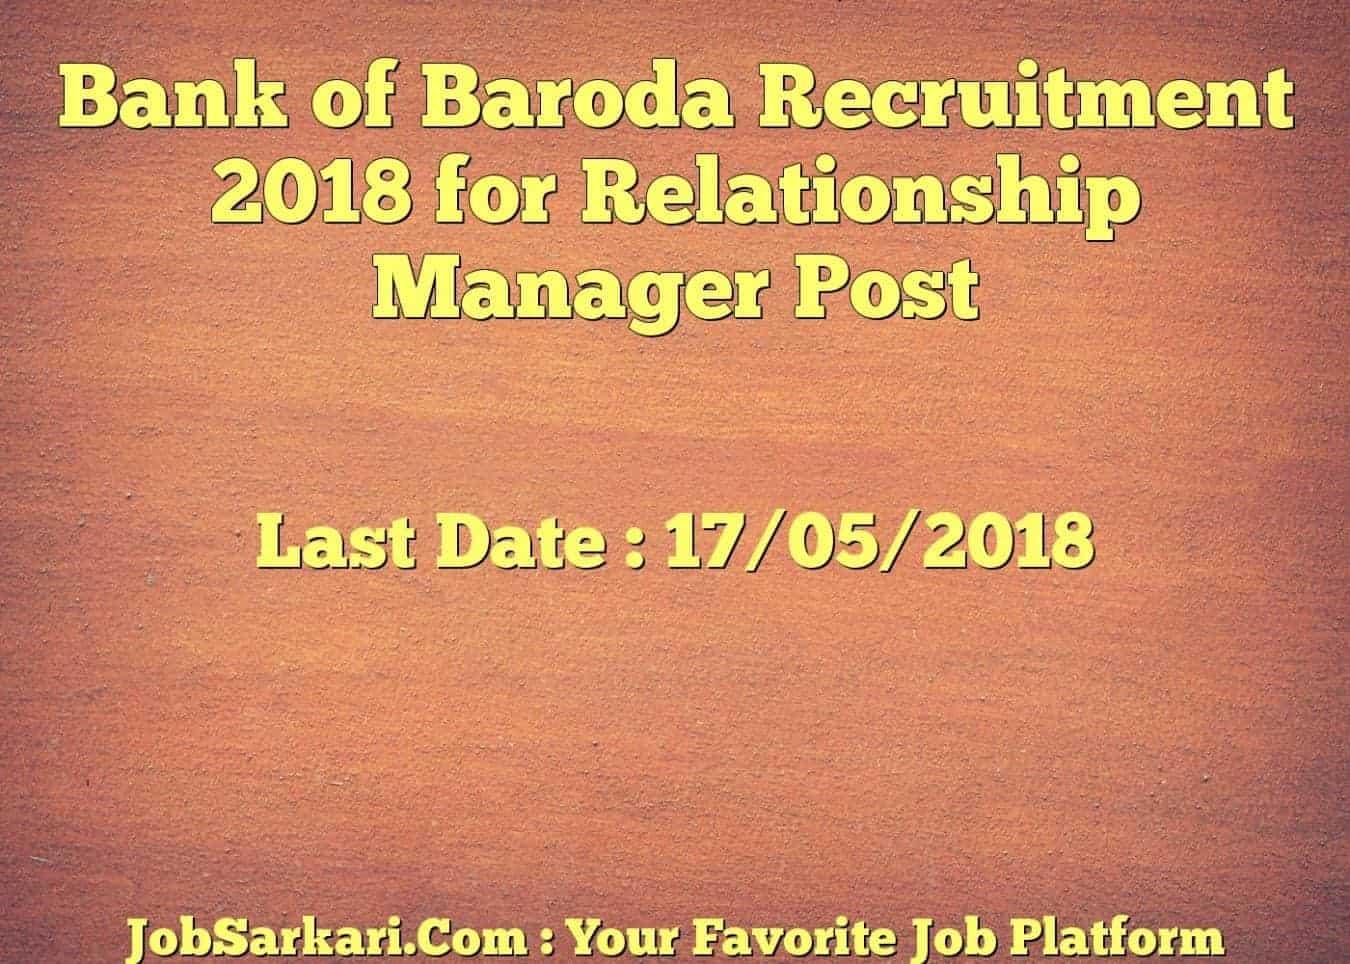 Bank of Baroda Recruitment 2018 for Relationship Manager Post